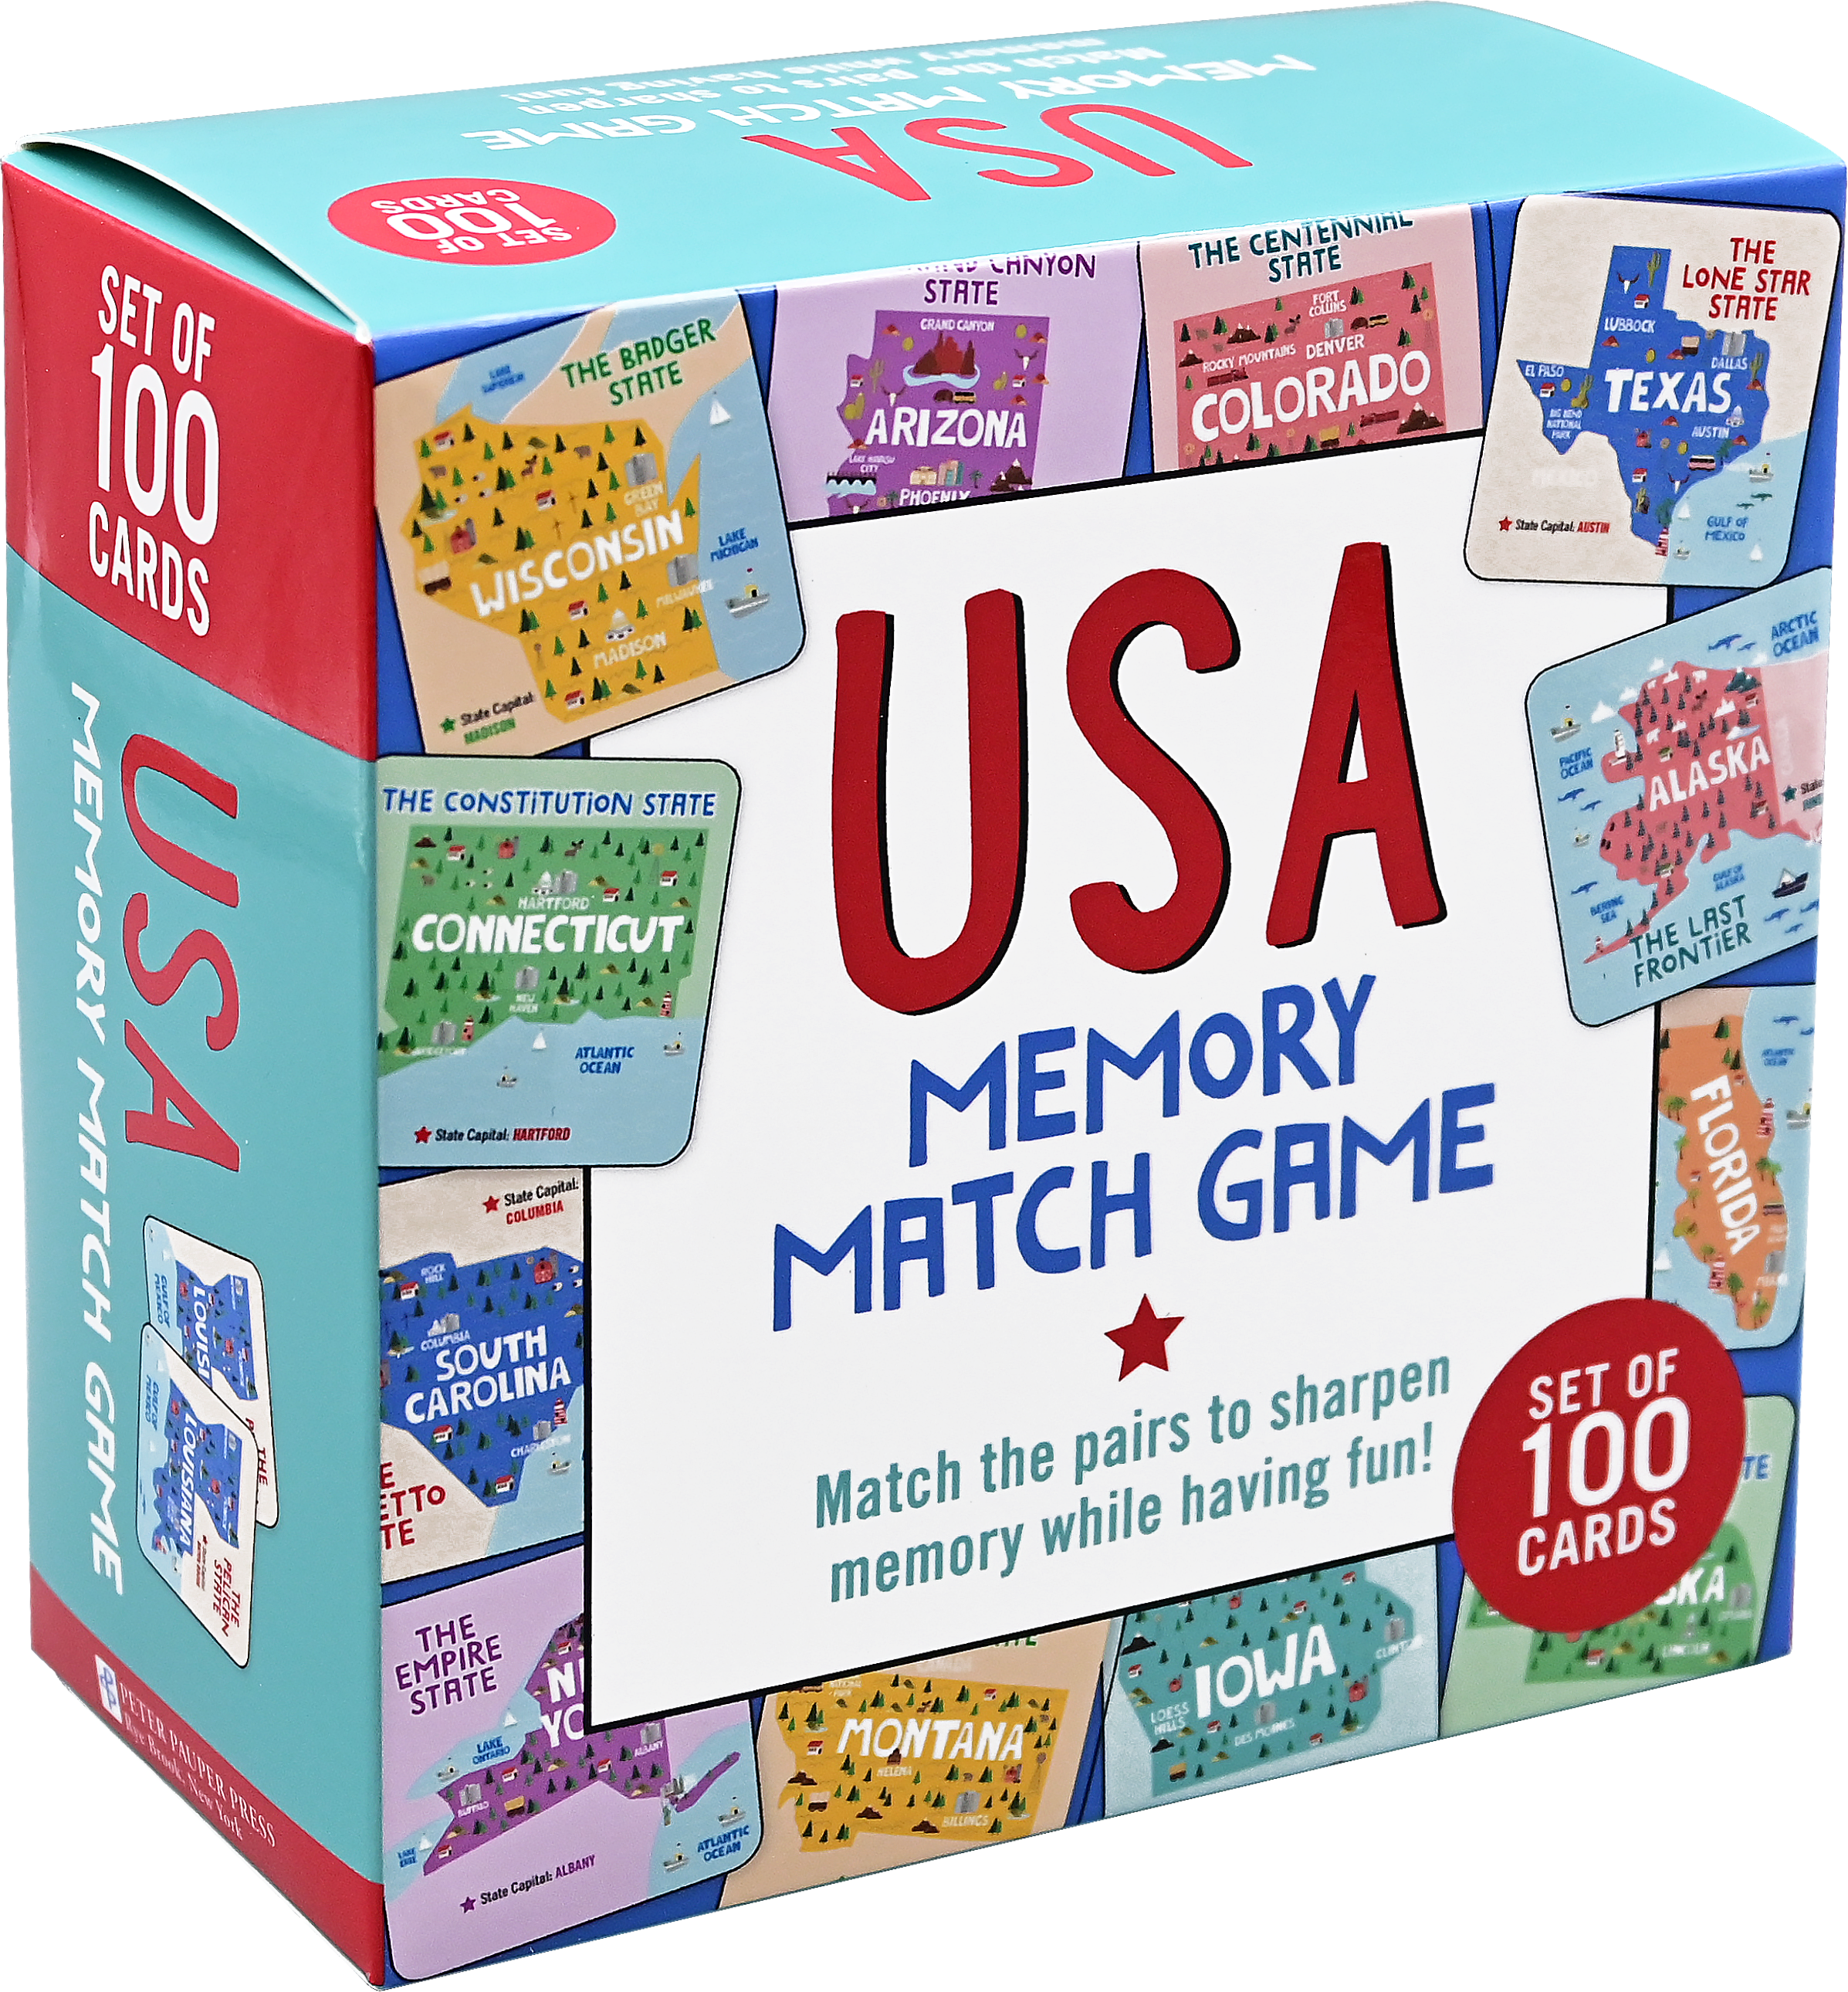 Memory Challenge Marvel Comics Edition Matching Game Complete, USAopoly